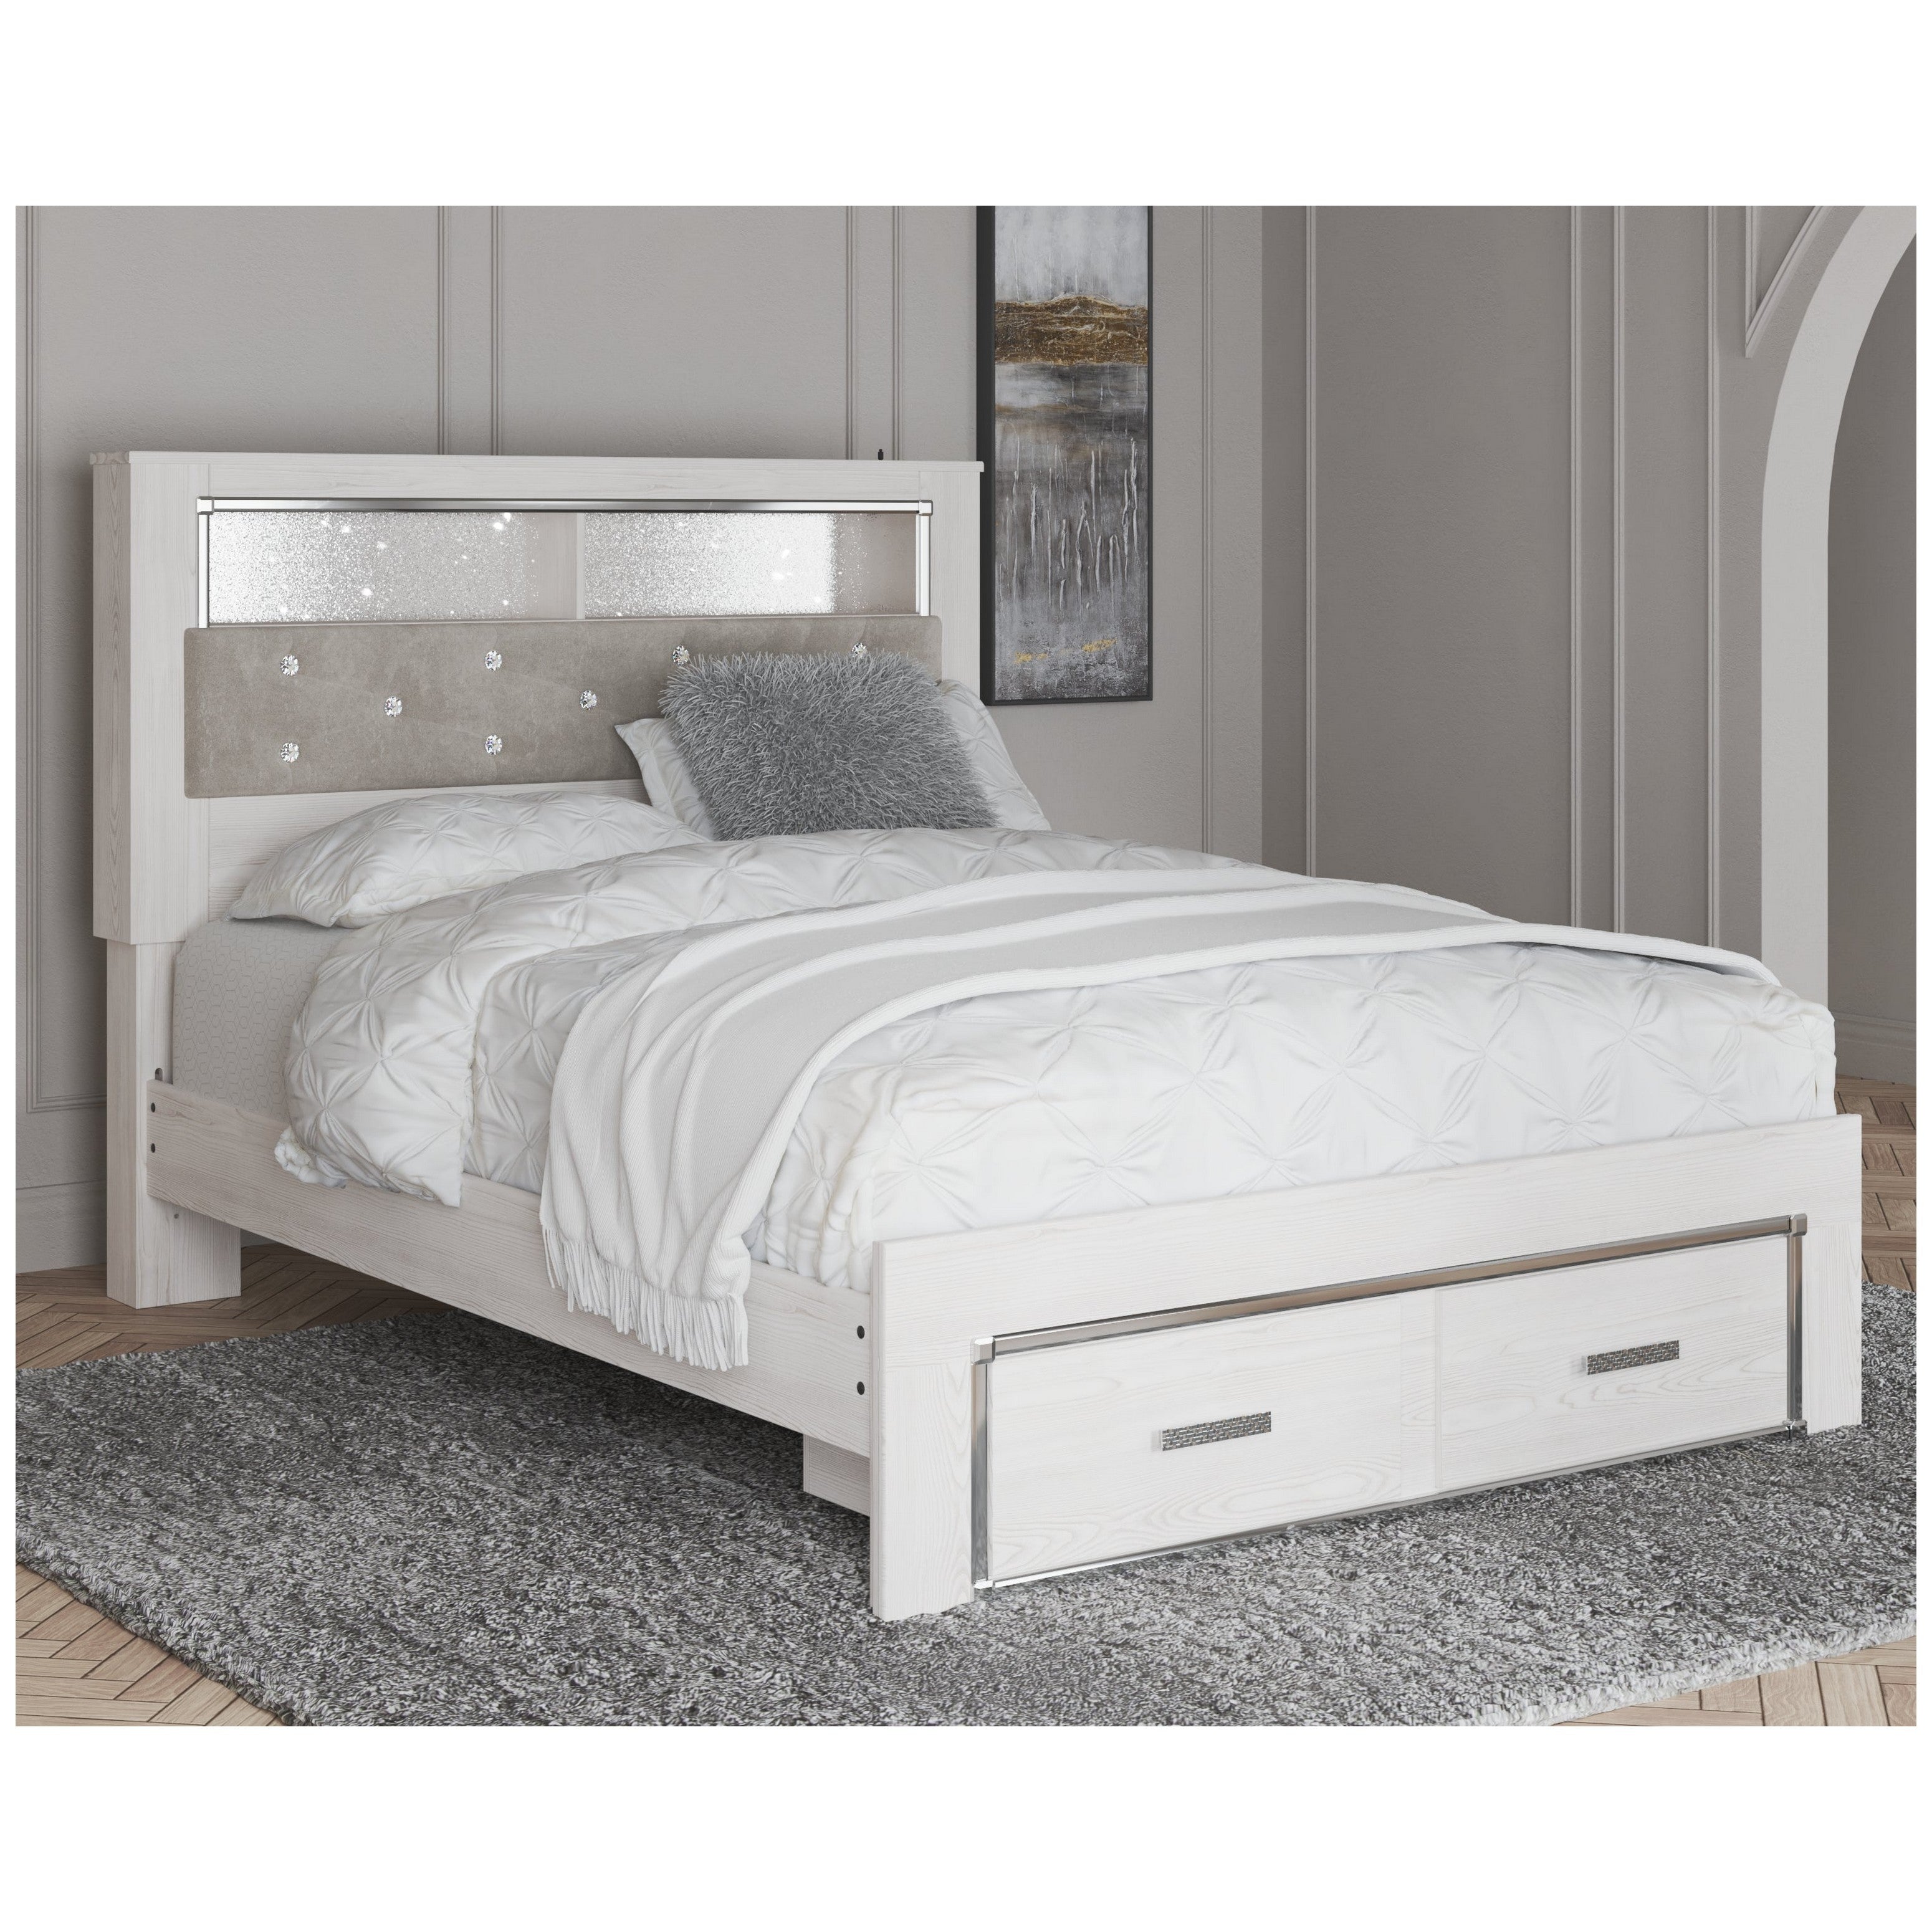 Altyra Upholstered Bookcase Bed with Storage - Ash-B2640B19 - Underkut